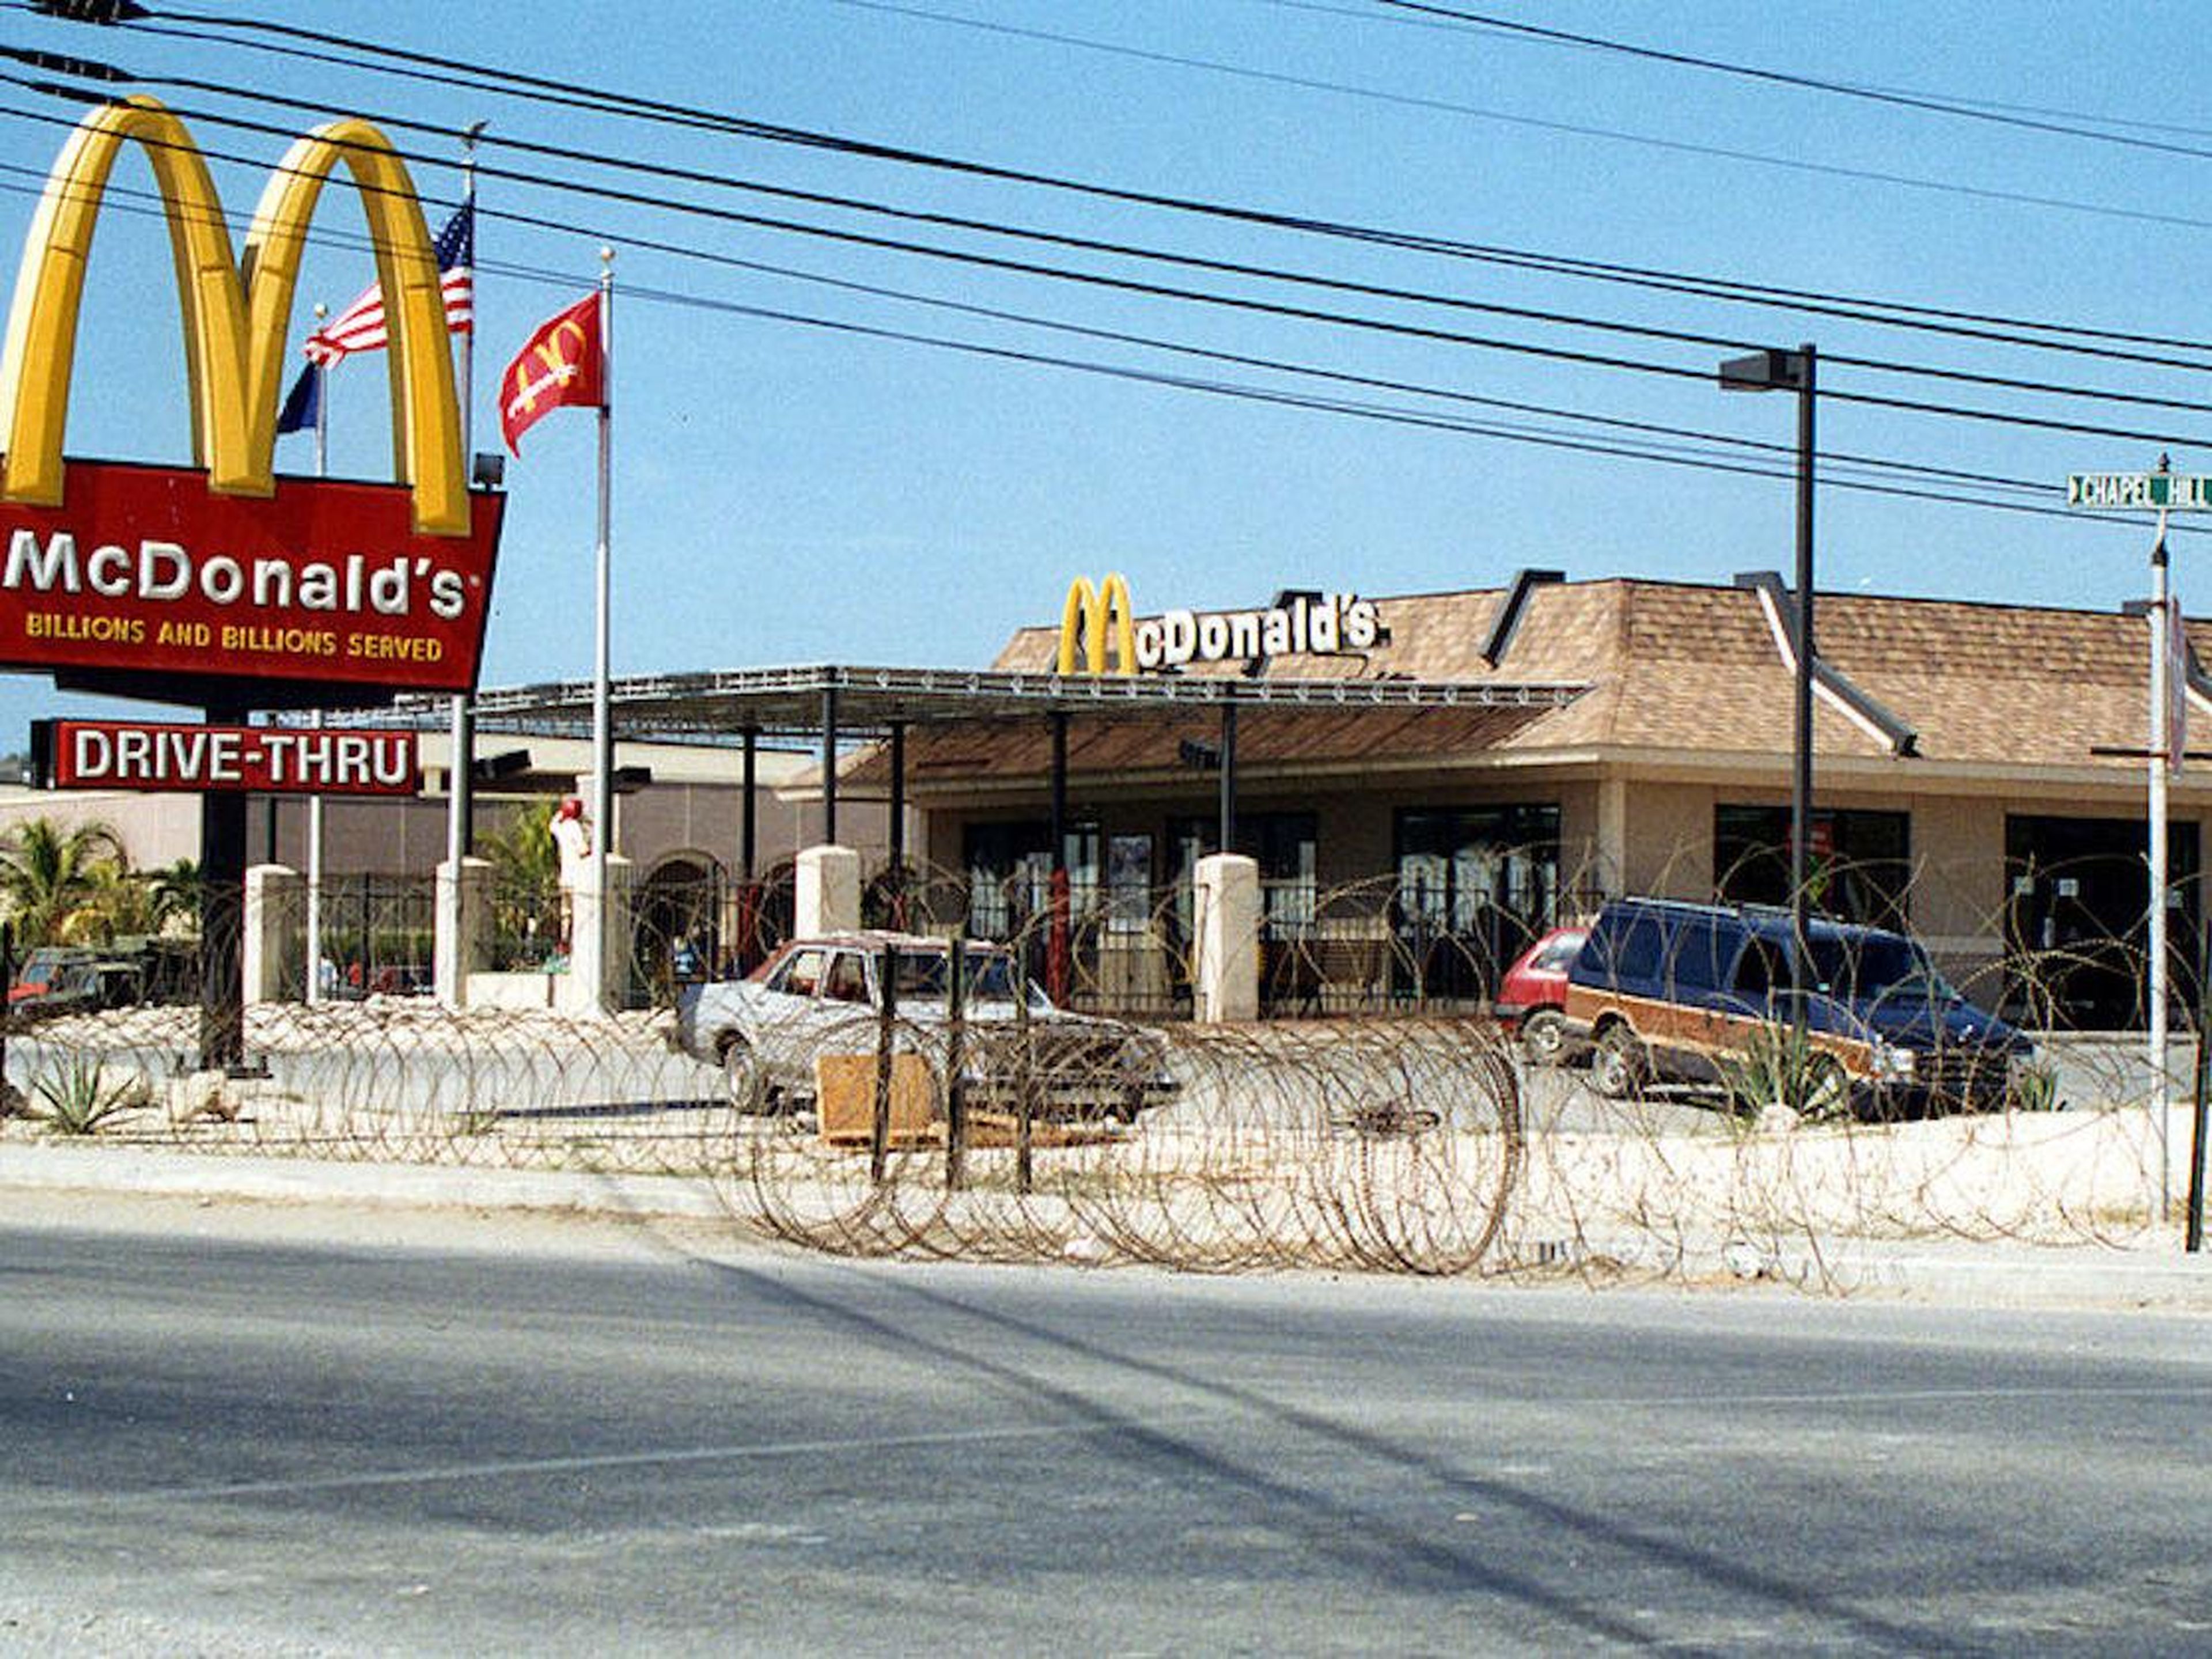 Guantanamo Bay, Cuba, is home to the only McDonald's surrounded by barbed wire.